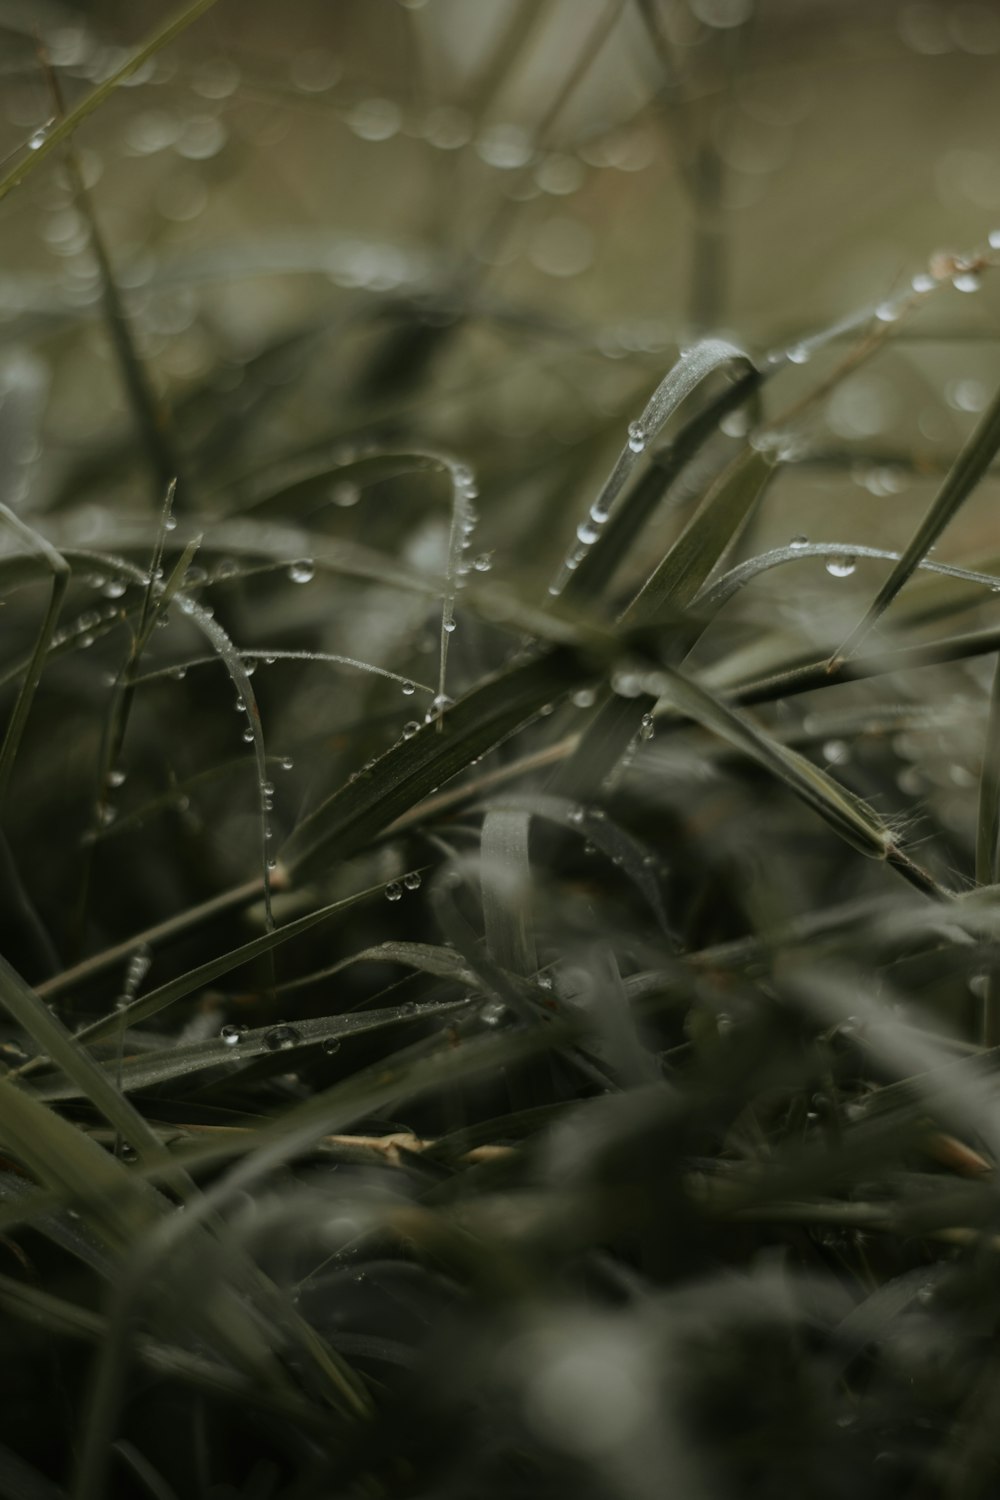 water droplets on green grass